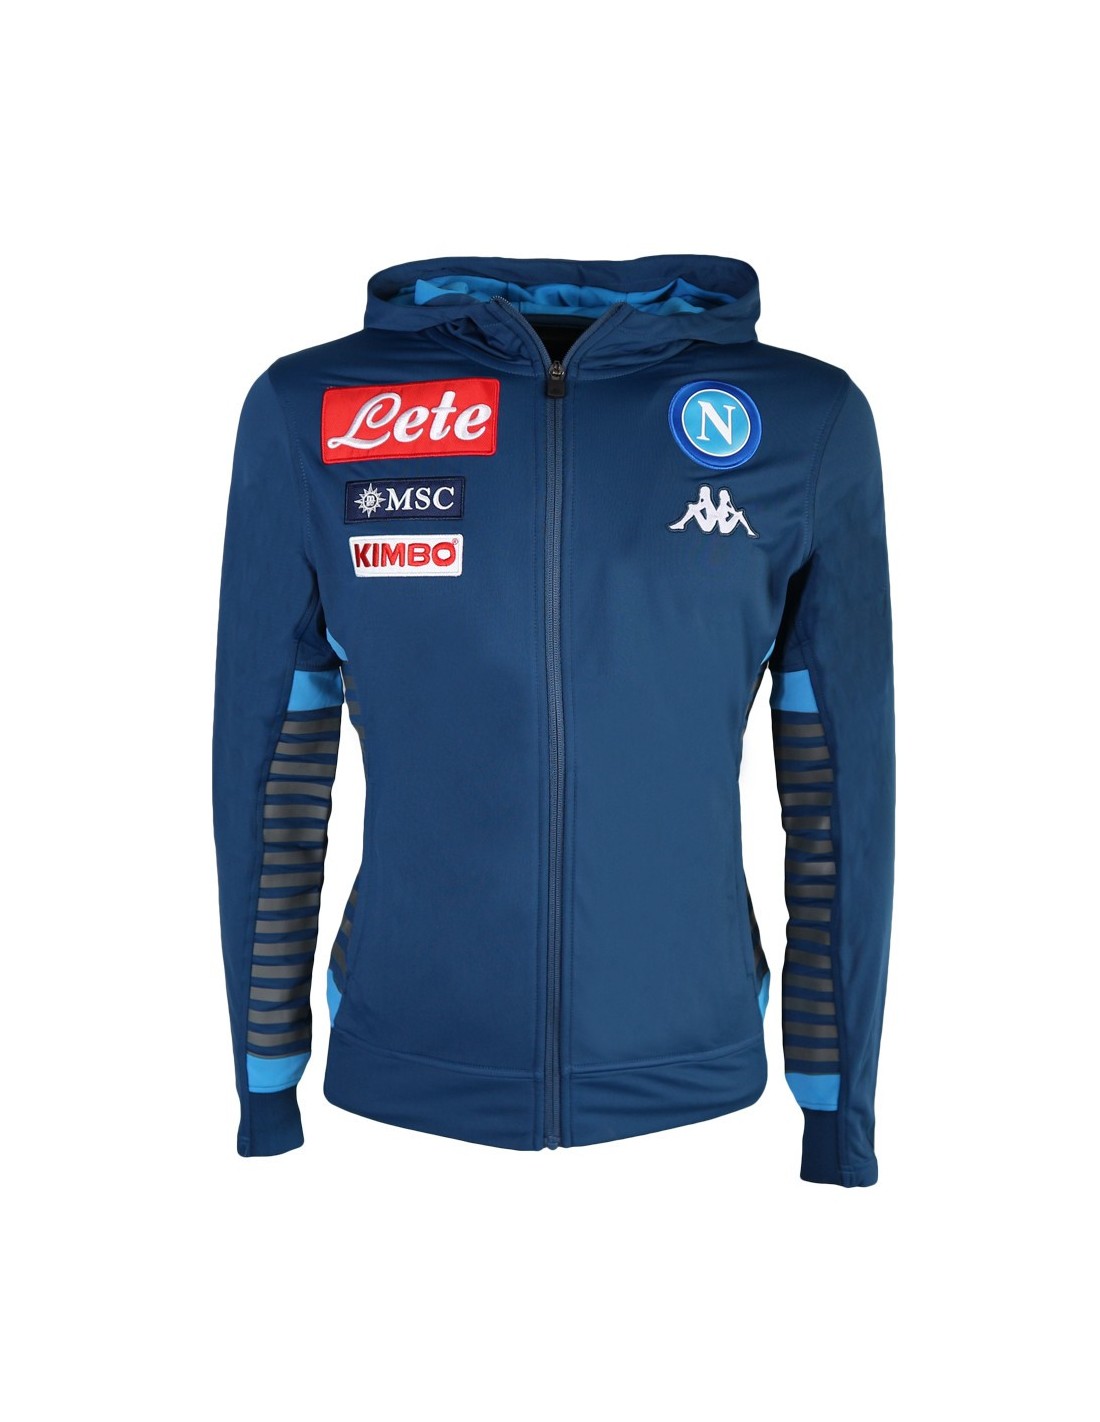 SSC Napoli hooded Special Edition soccer tracksuit 2019/20 camo black -  Kappa –